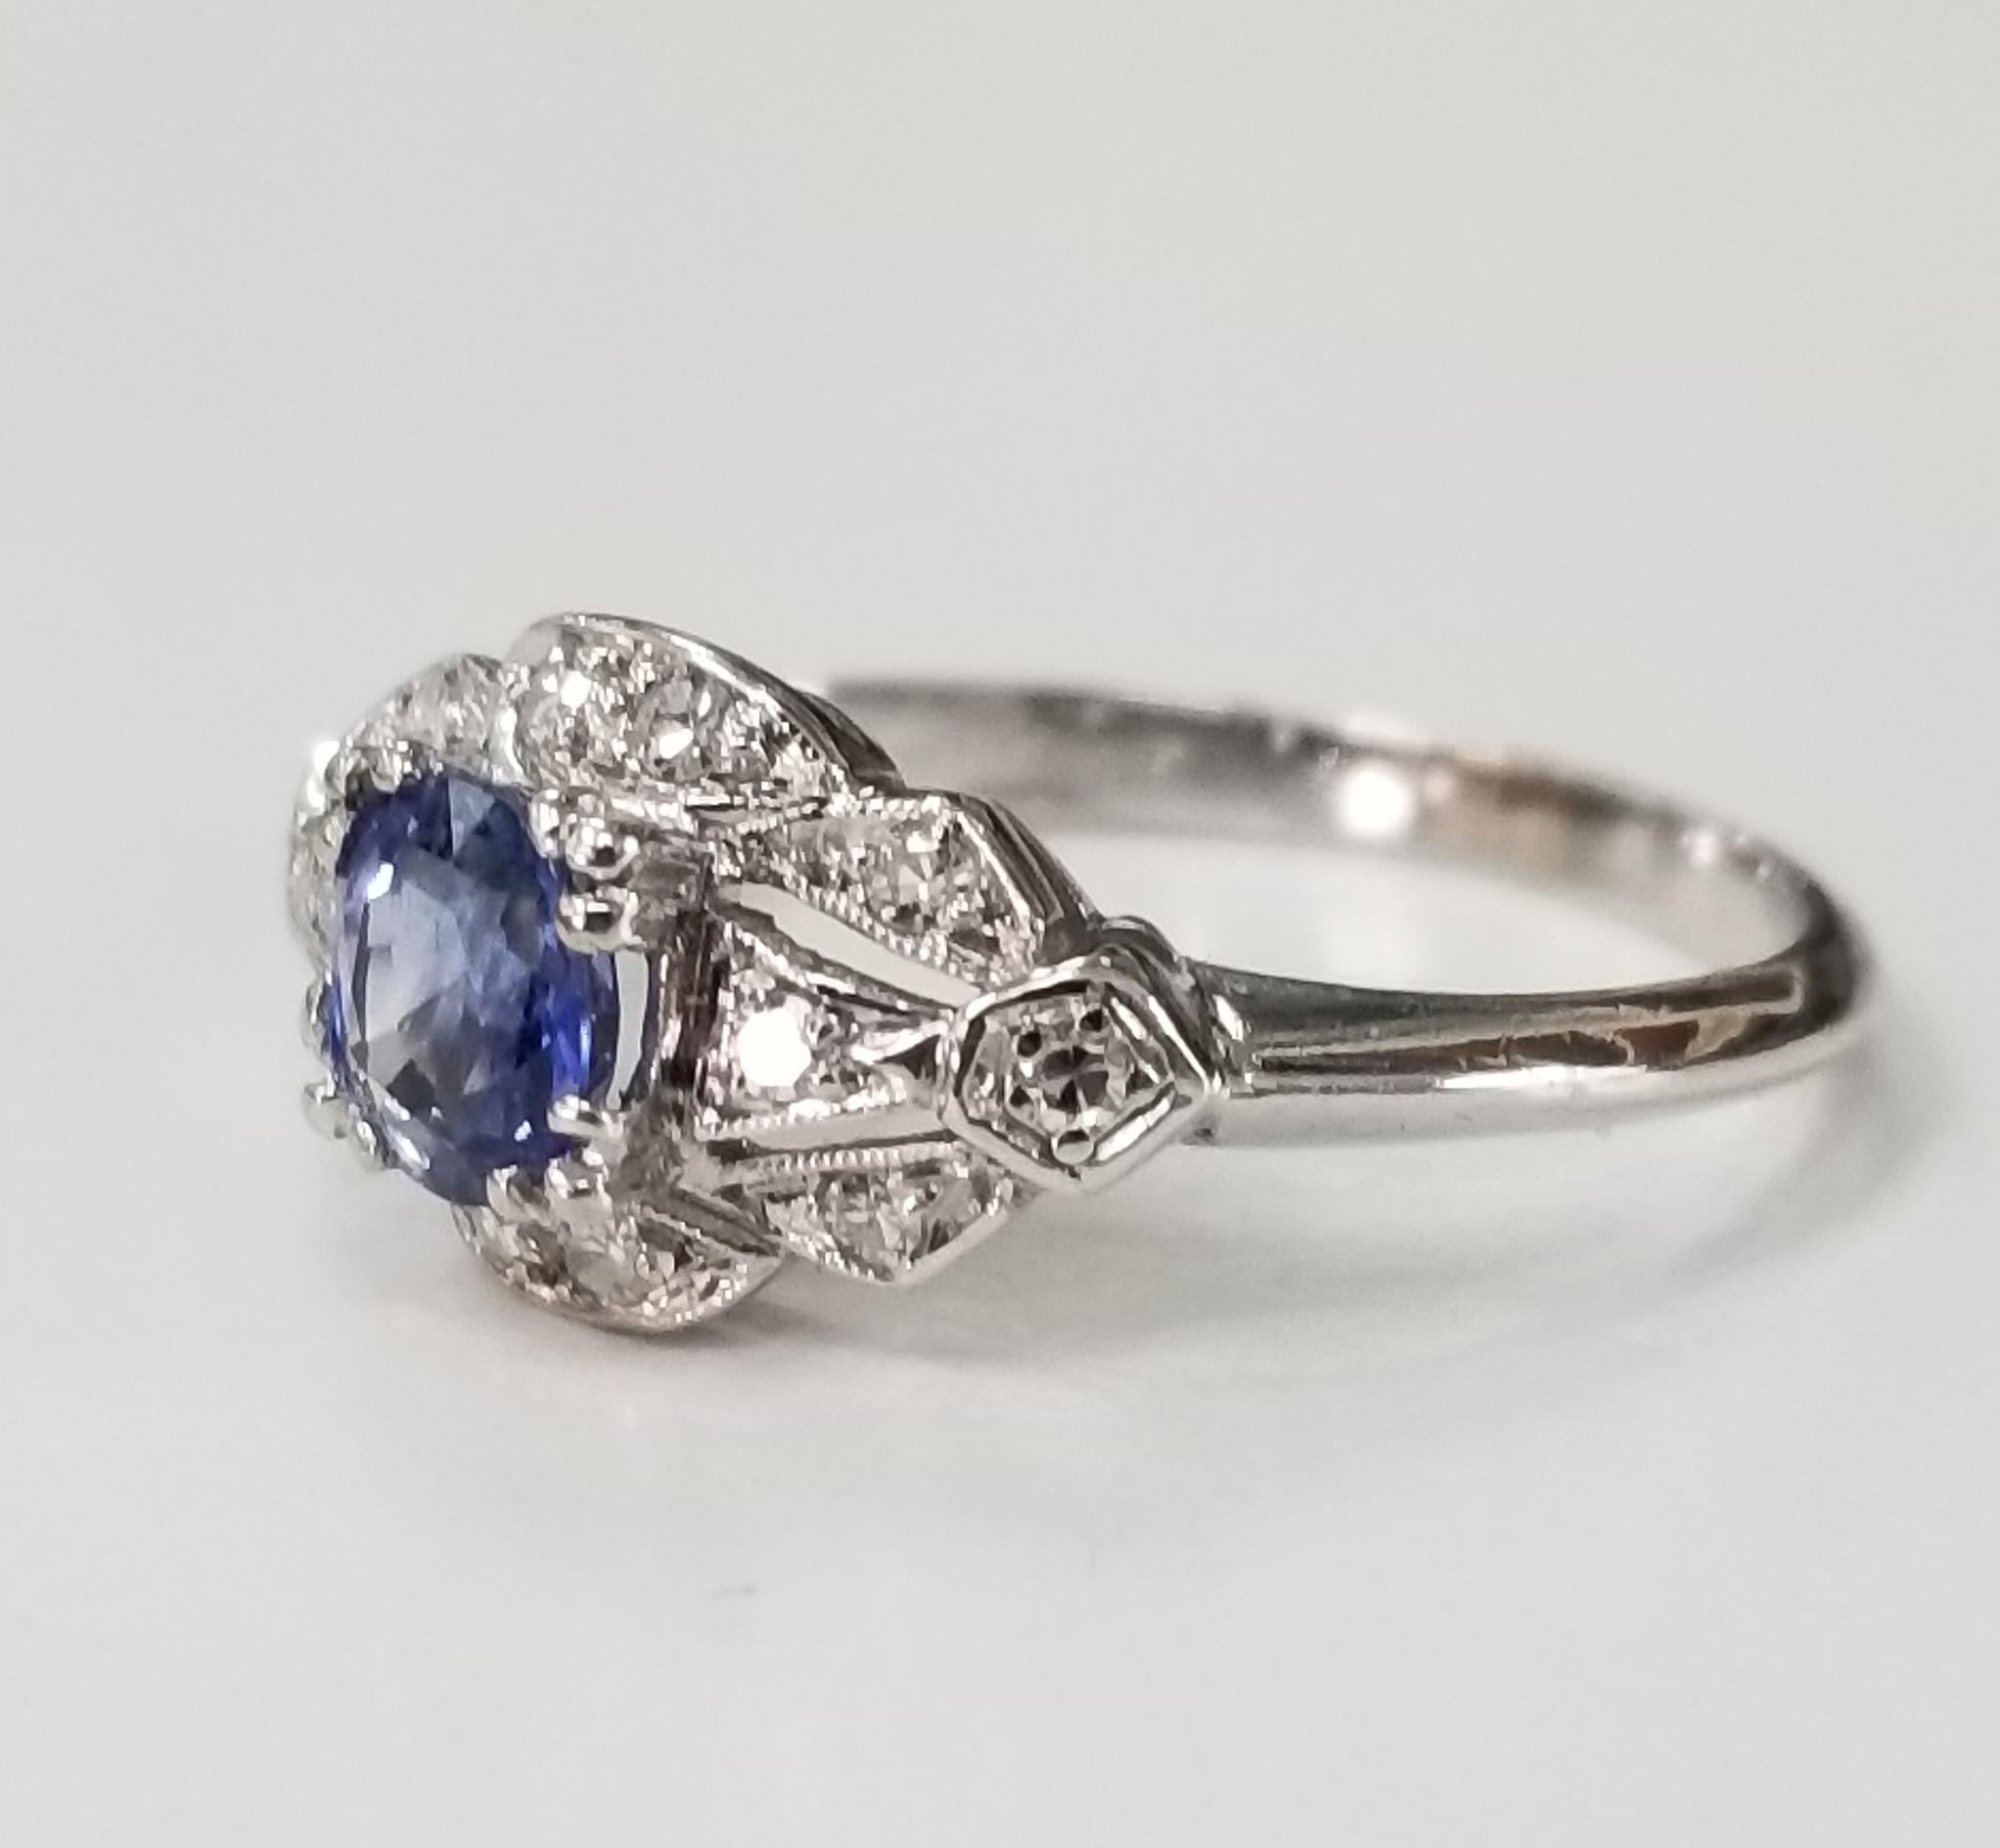 Platinum  sapphire and diamond ring containing 1 oval ceylon sapphire weighing .60pts. and 12 round single cut diamonds weighing .24pts.  This ring is a size 5.5 but we will size to fit for free.